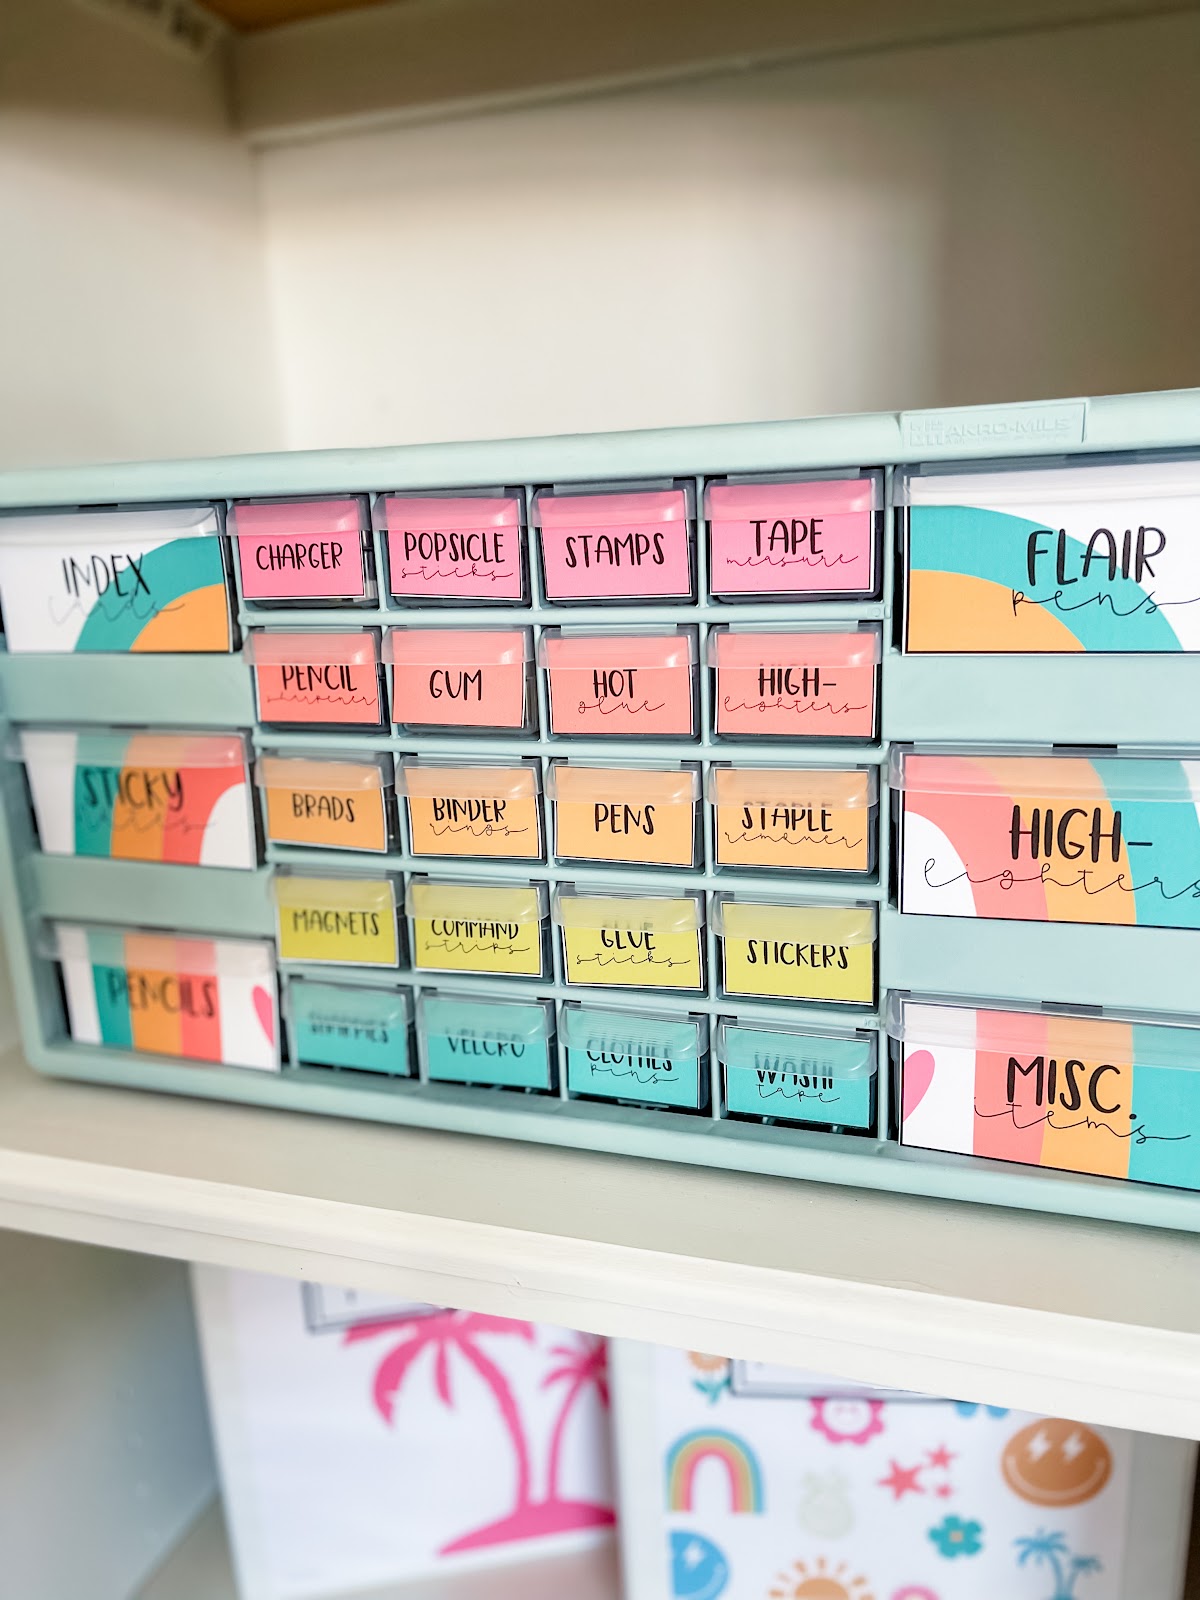 This image shows a teacher toolbox used to hold small supplies. Each drawer is labeled to display what goes in each drawer. The larger drawers on the outside are decorated with two sides of a rainbow. The boxes on the inside are simply colorful squares, no extra decorations. 